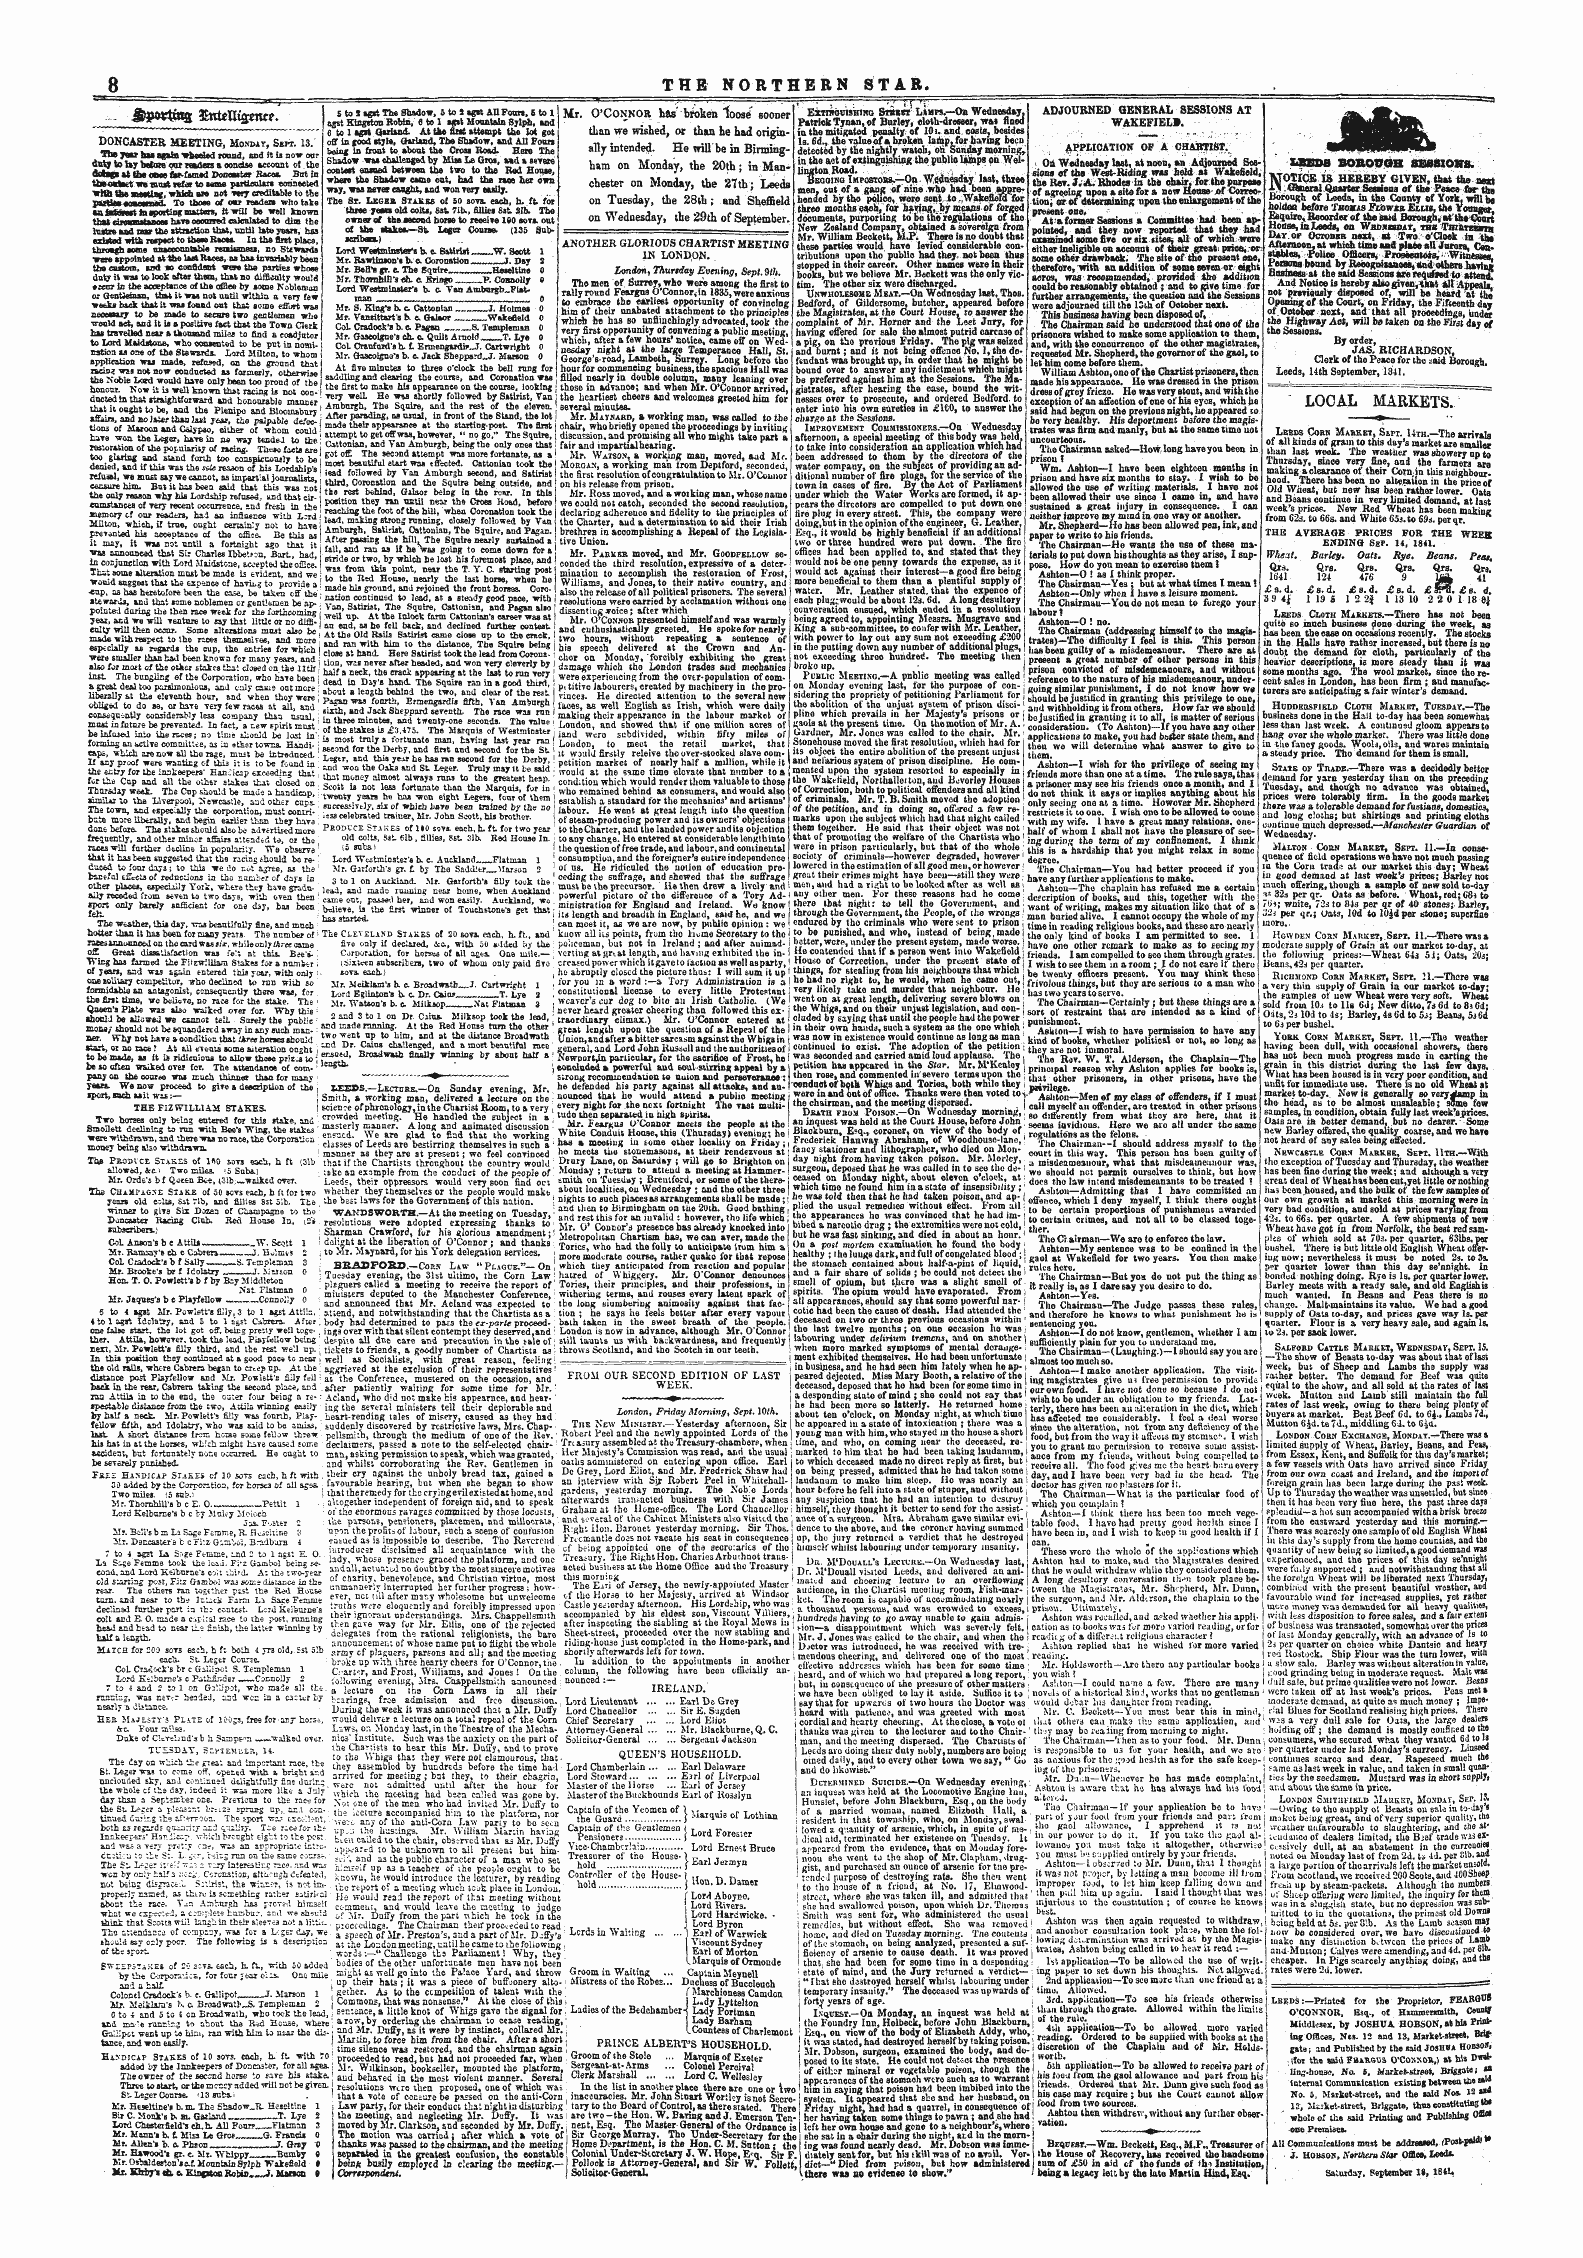 Northern Star 17 1852 18th September 1841 Edition 1 Of 5 Page 8 Lbj D3 Printed For The Proprietor Fbargu5 Nineteenth Century Serials Edition